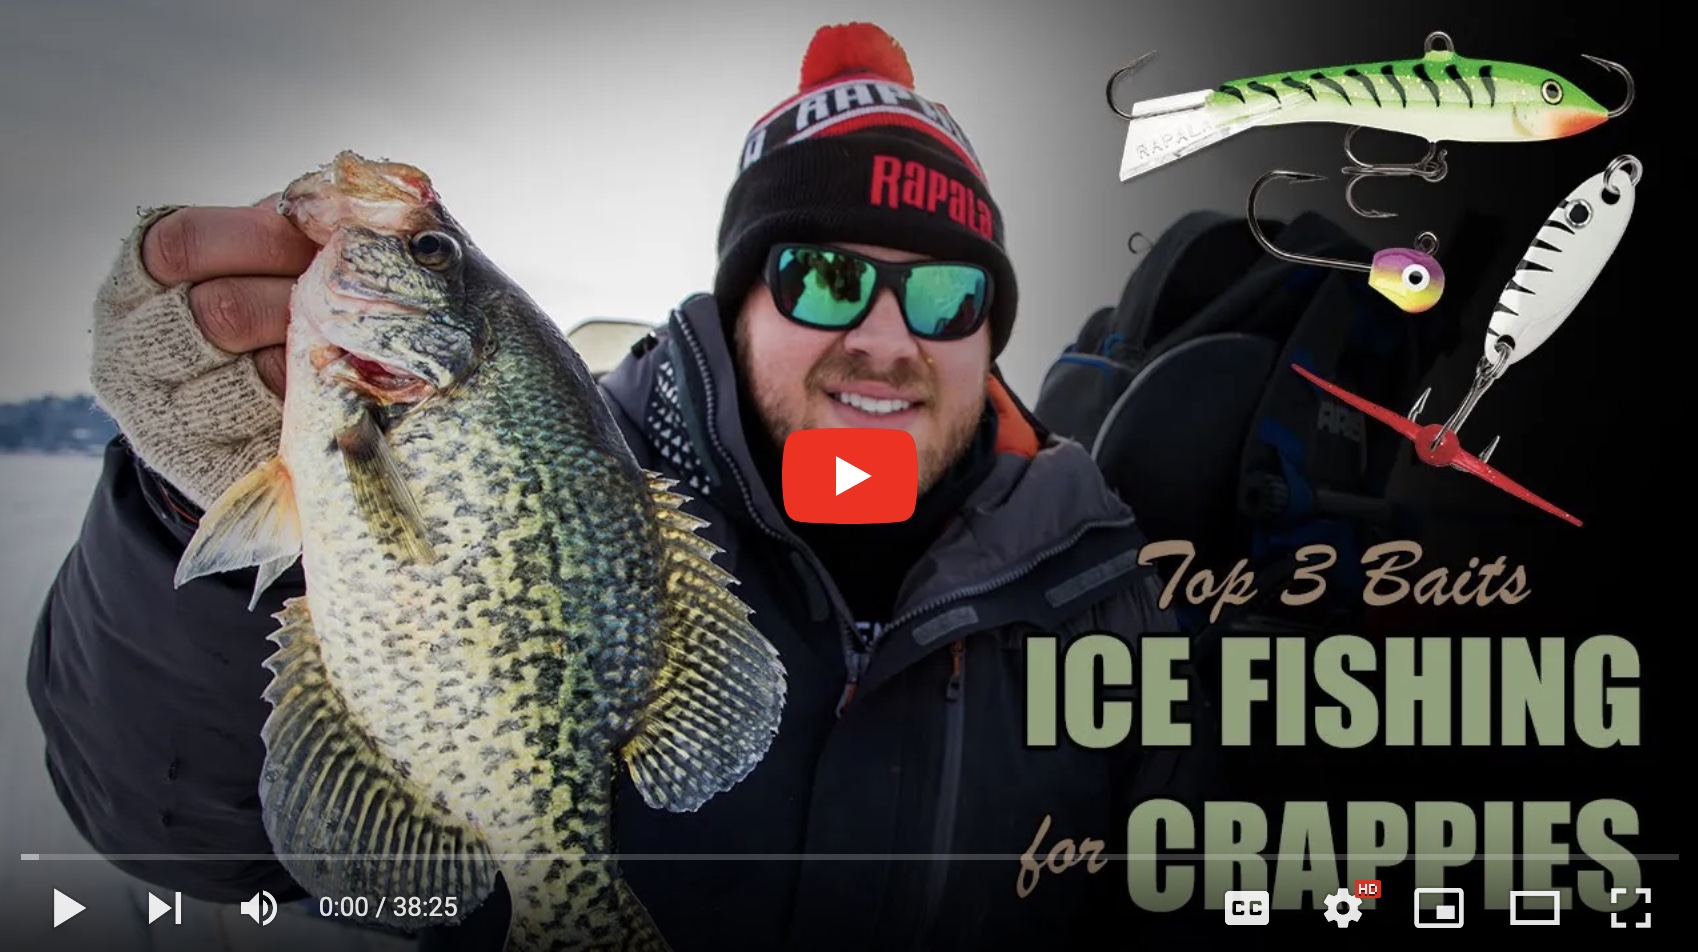 Fish pics on dating apps, Crappie baits to catch anywhere, Ice